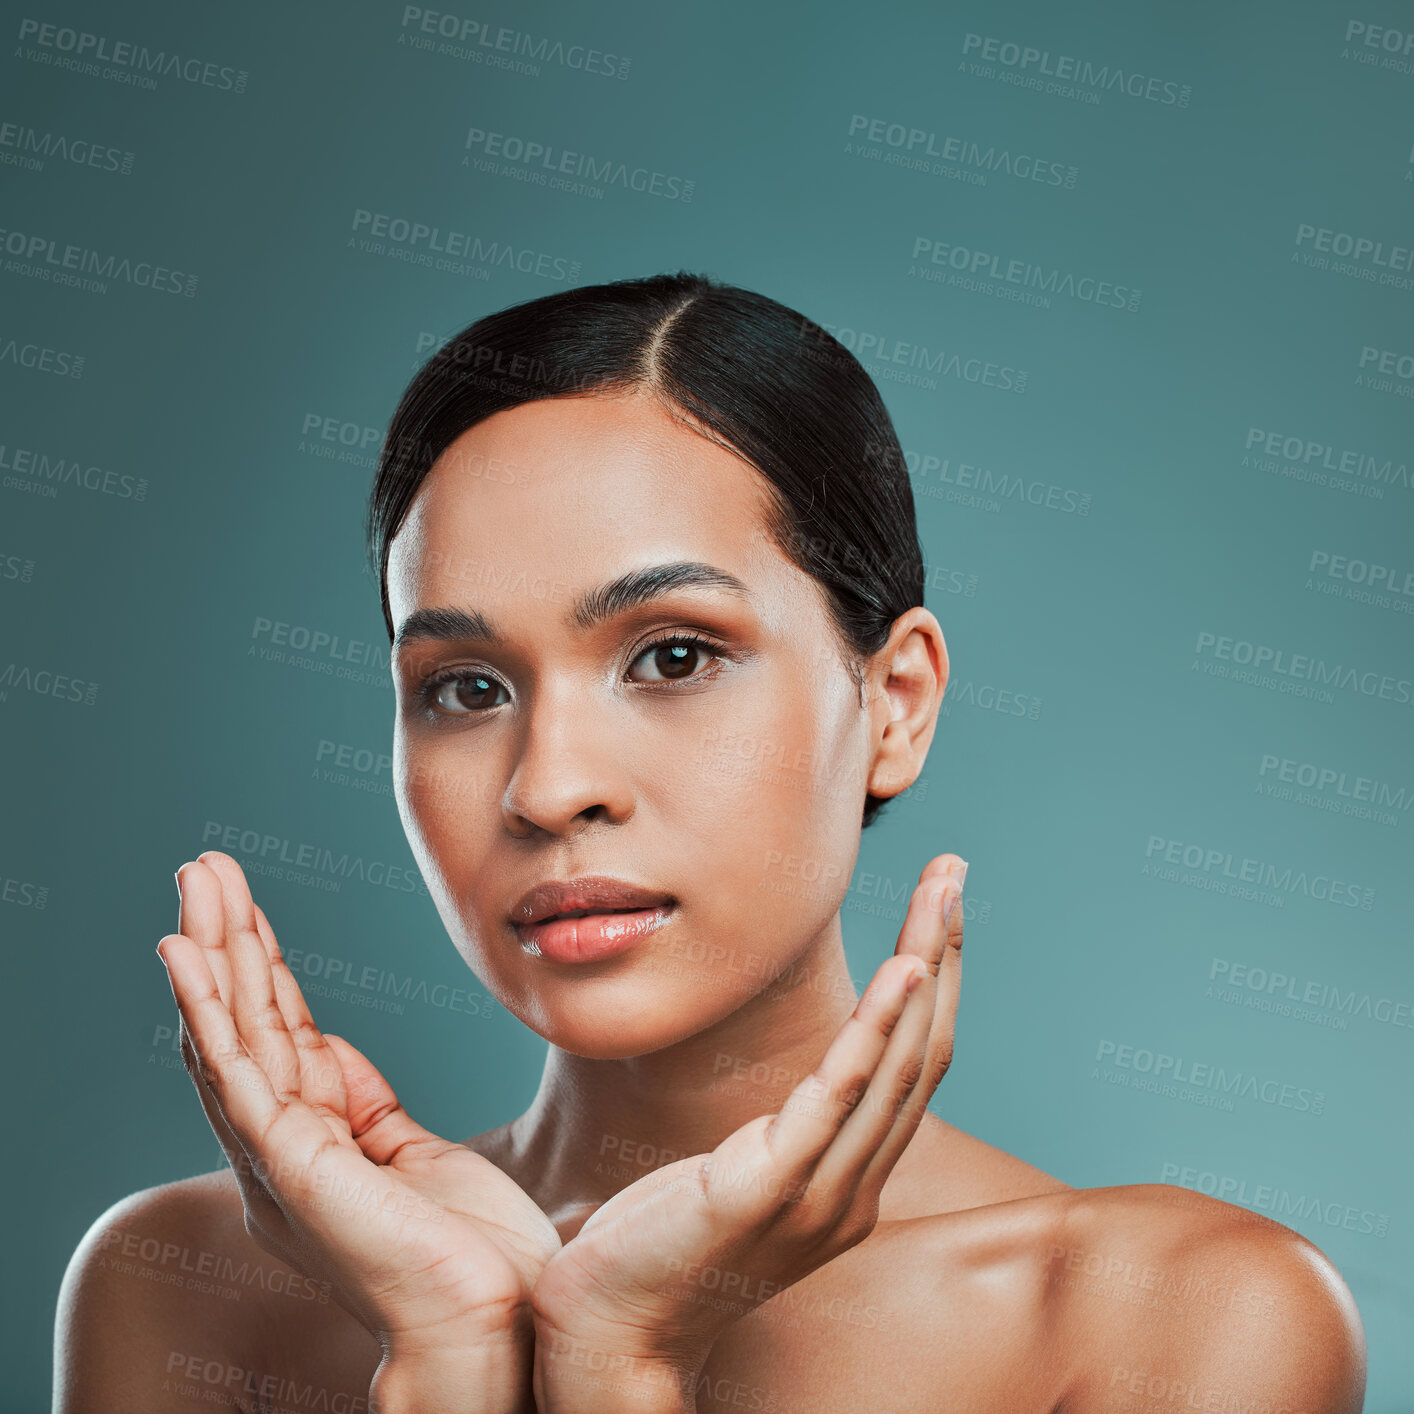 Buy stock photo Portrait of a young beautiful mixed race woman with smooth soft skin posing against a green studio background. Attractive Hispanic female with stylish makeup posing in studio